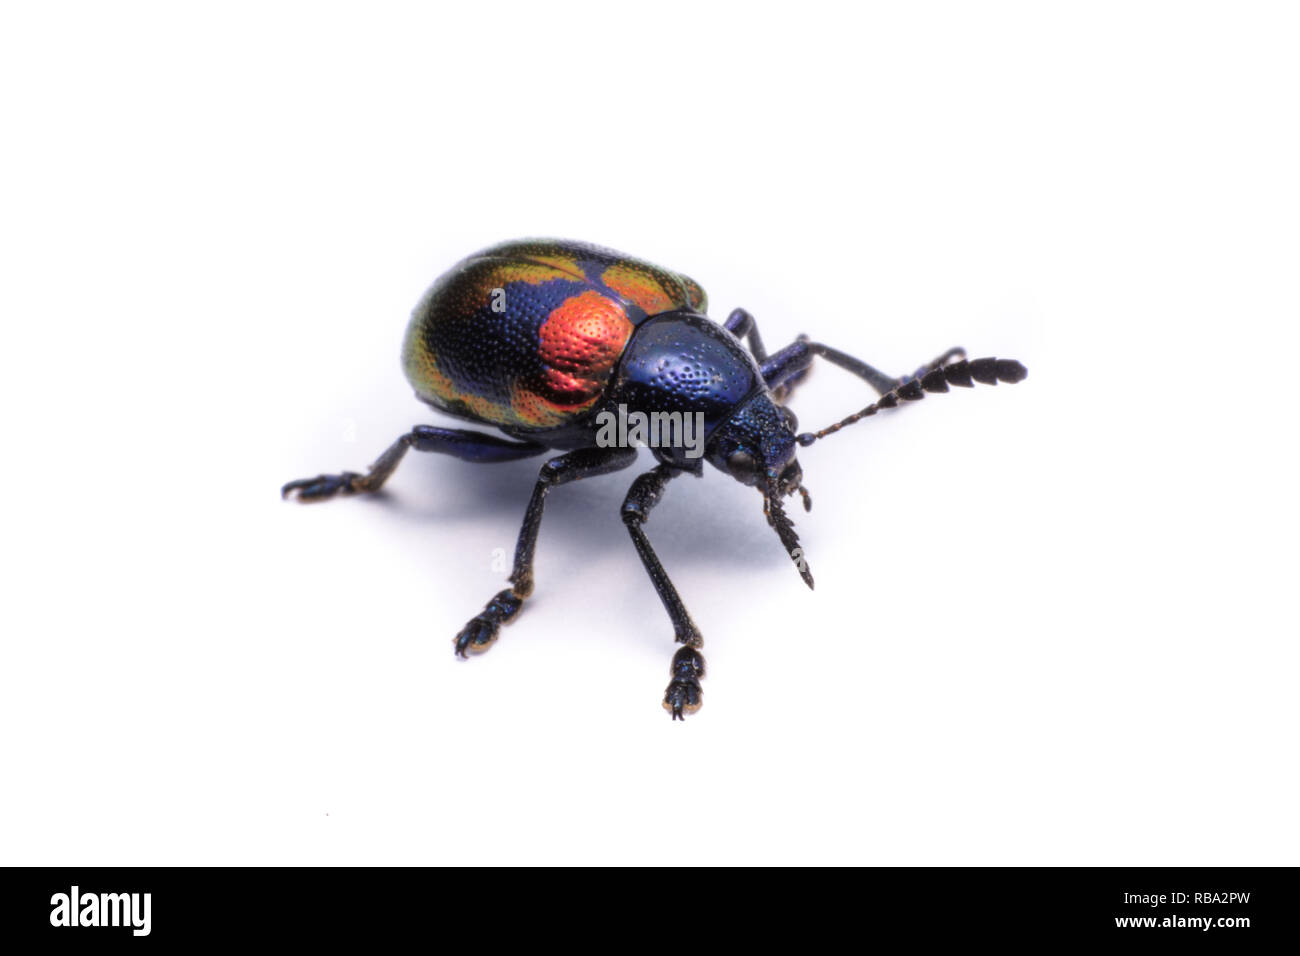 Blue Milkweed Beetle; Scientific Name Chrysochus pulcher Baly, isolated on white Stock Photo